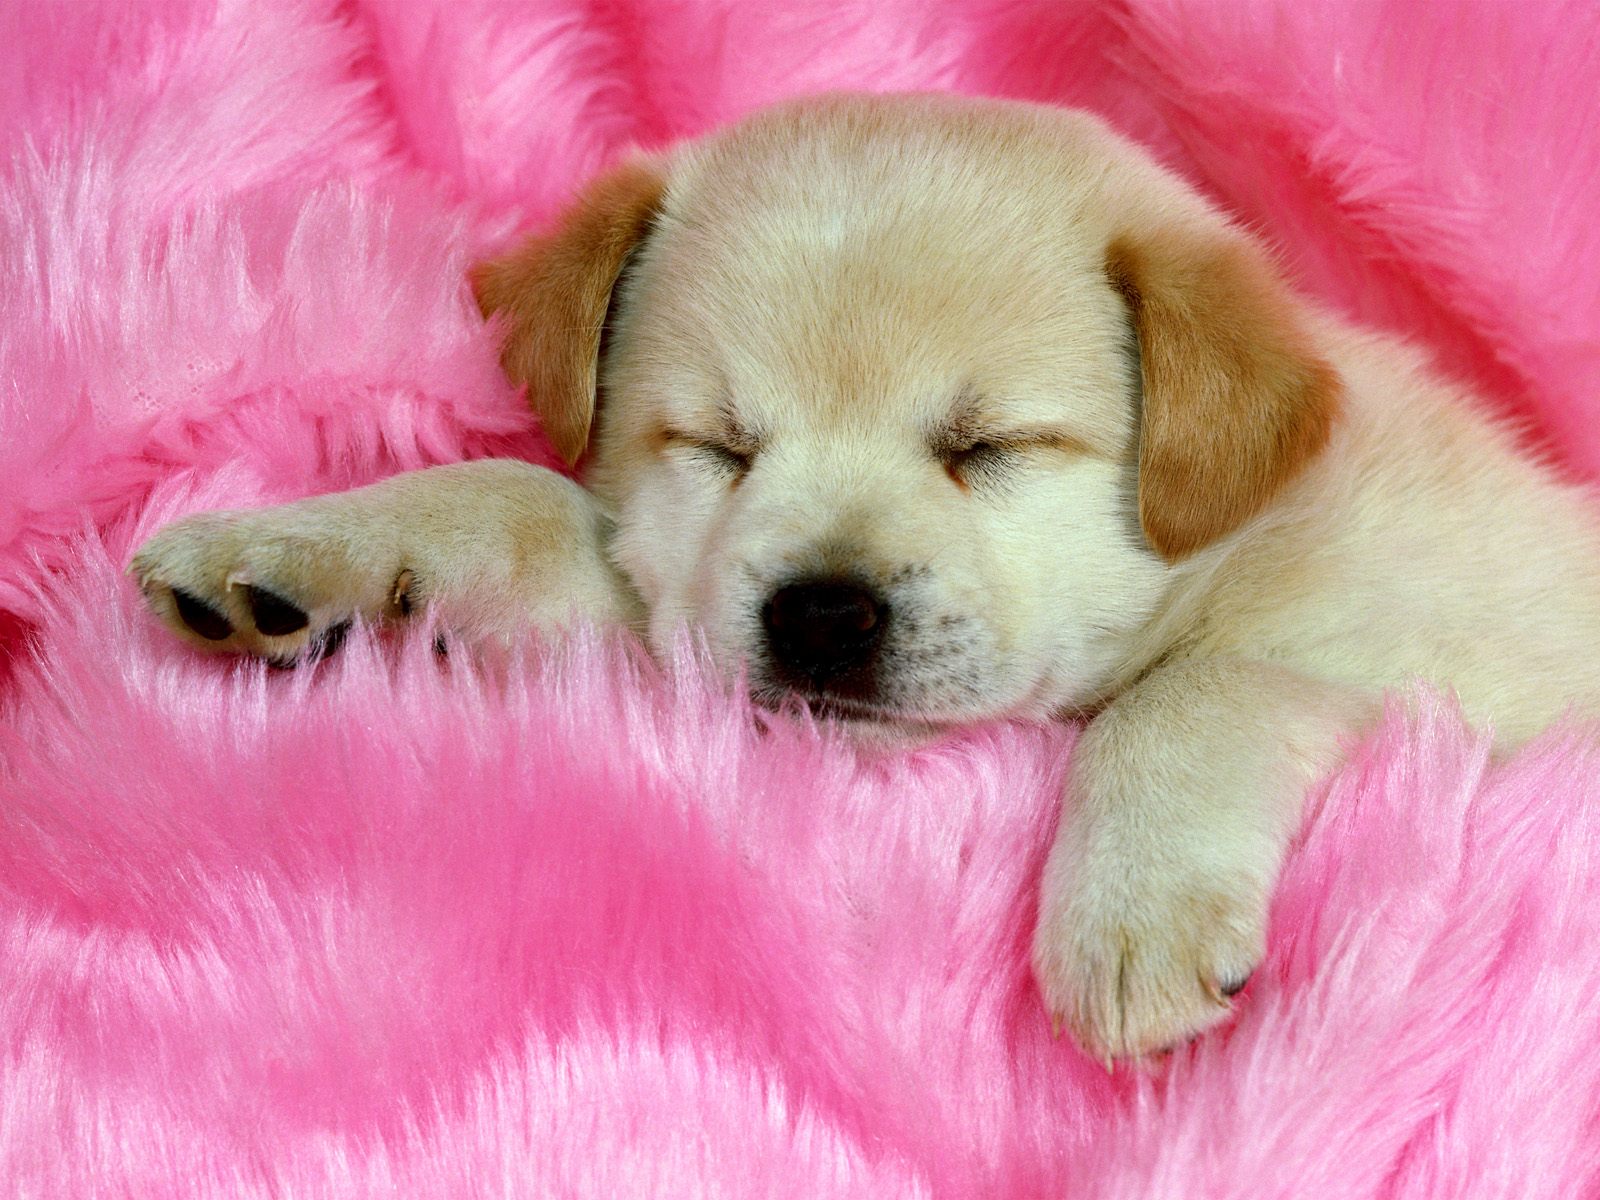 Cute wallpapers of puppies